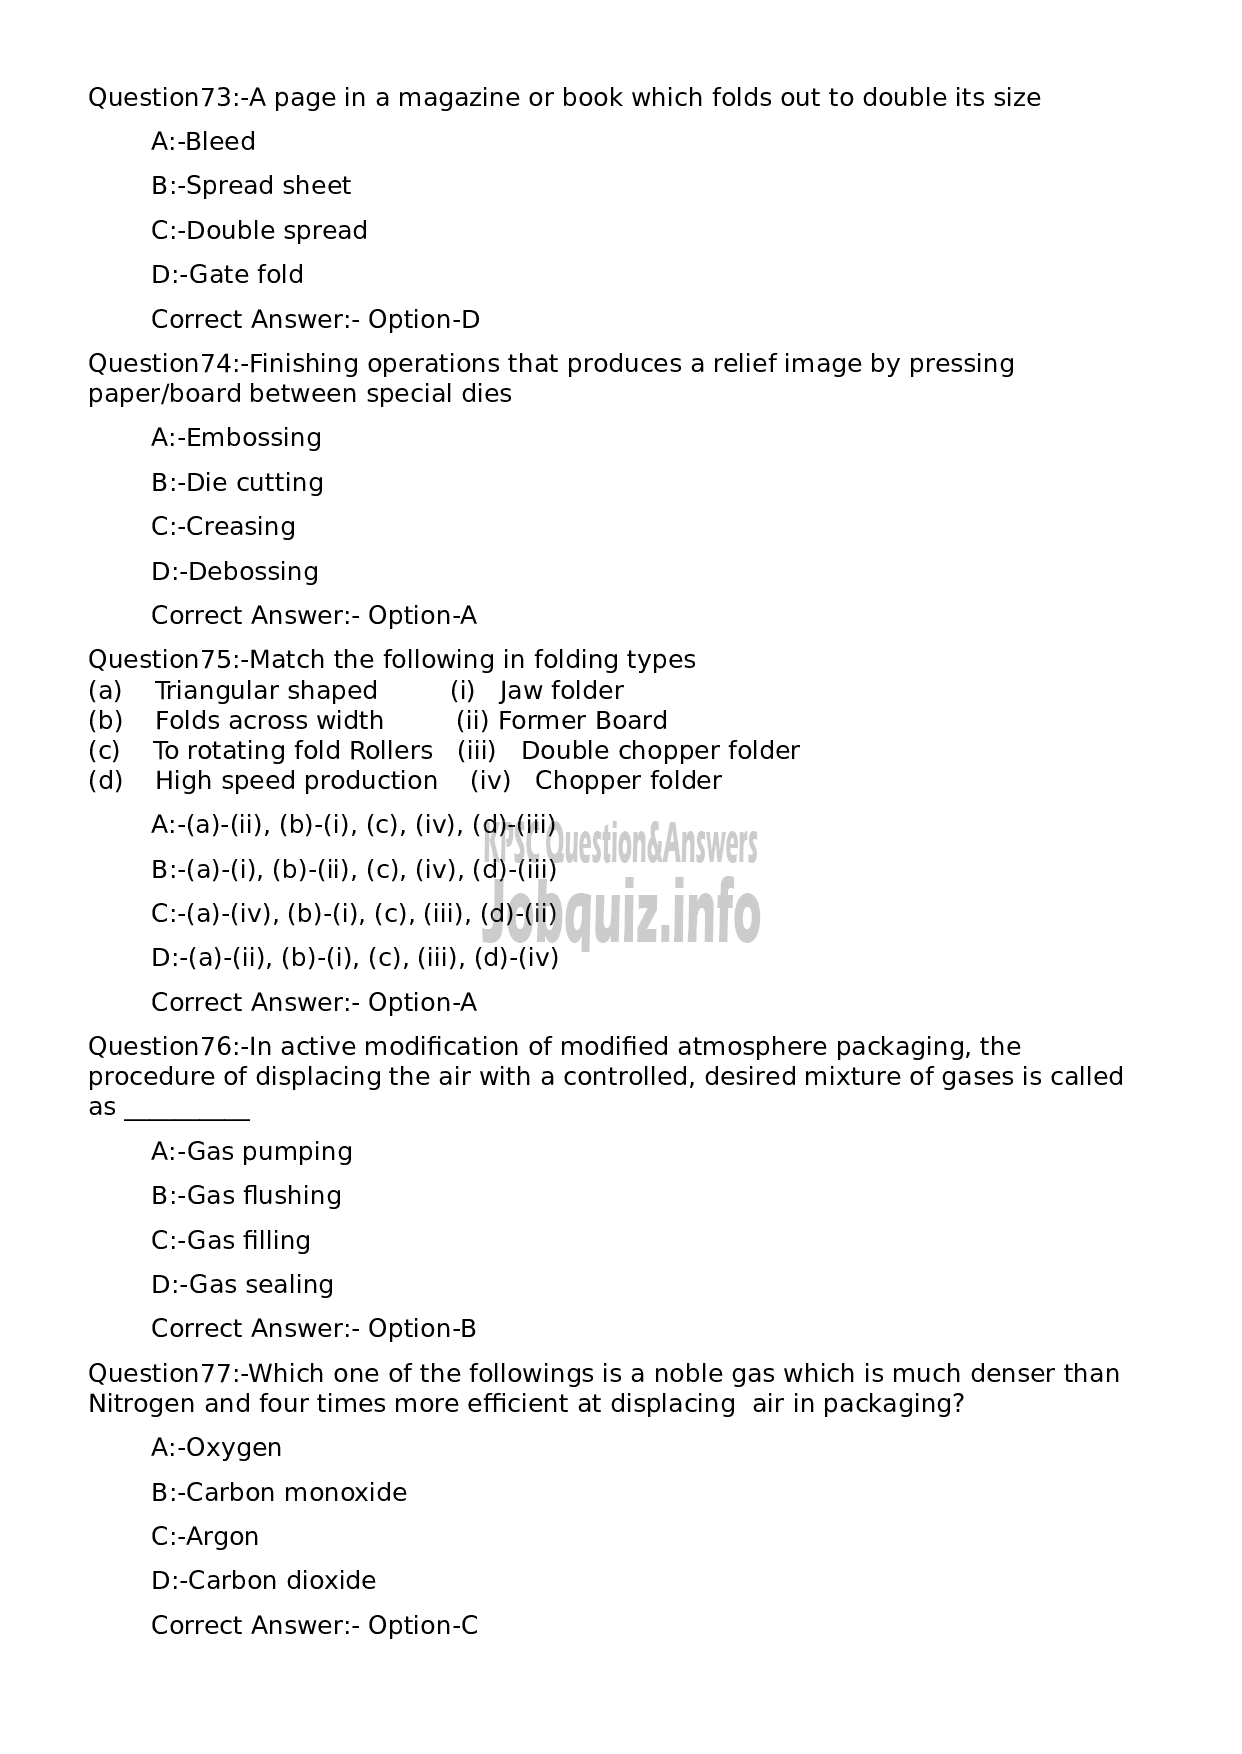 Kerala PSC Question Paper - Lecturer in Printing Technology-15